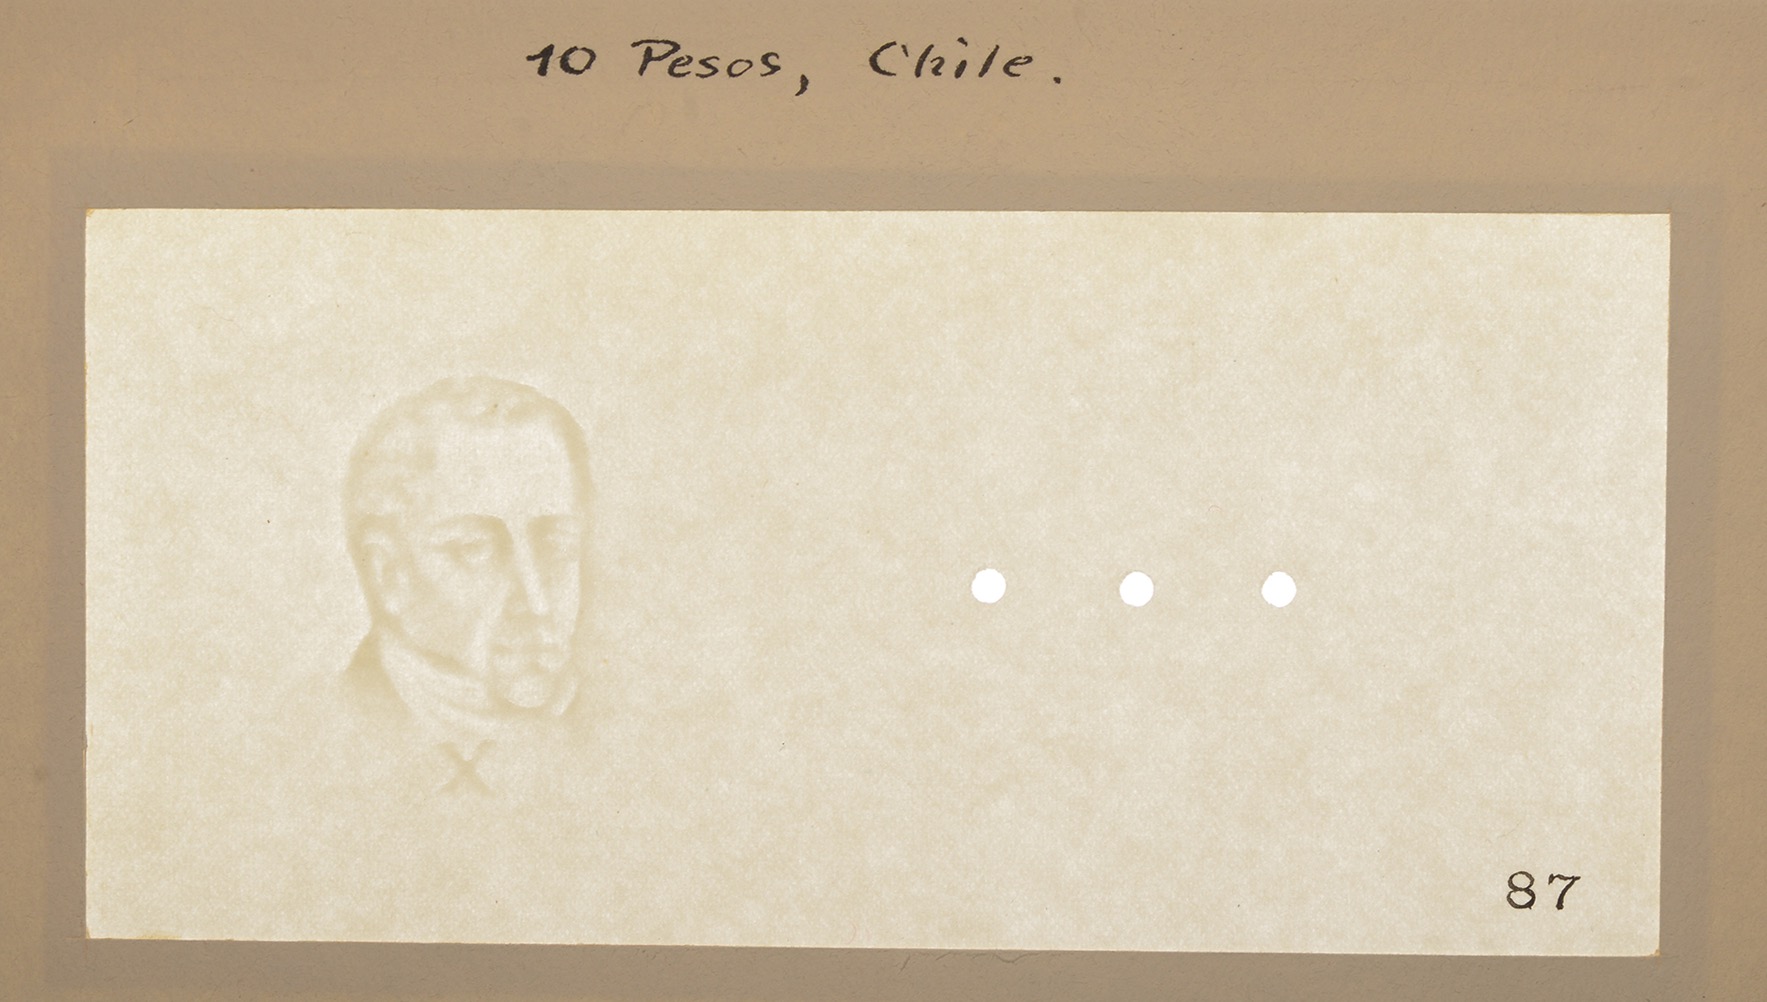 Banco Central de Chile, watermarked paper for the 5, 10 (3) and 20 Pesos (2), issue of... - Image 2 of 6